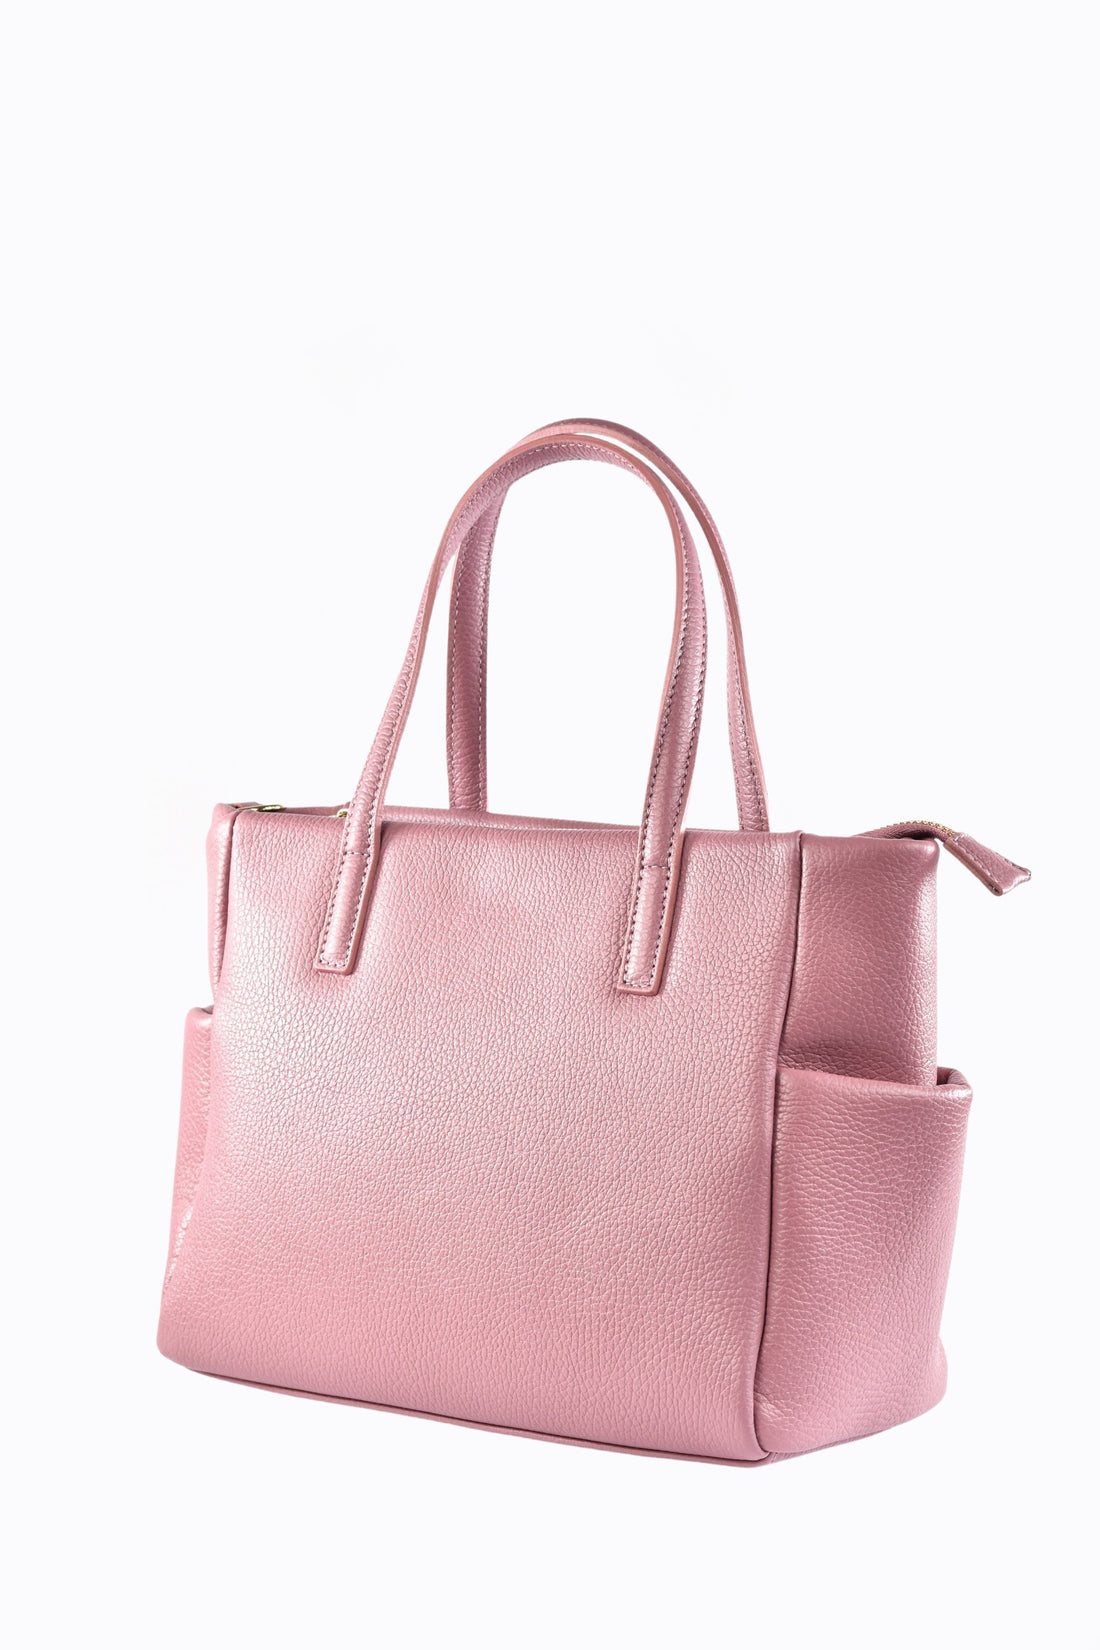 Diana bag in antique pink dollar leather